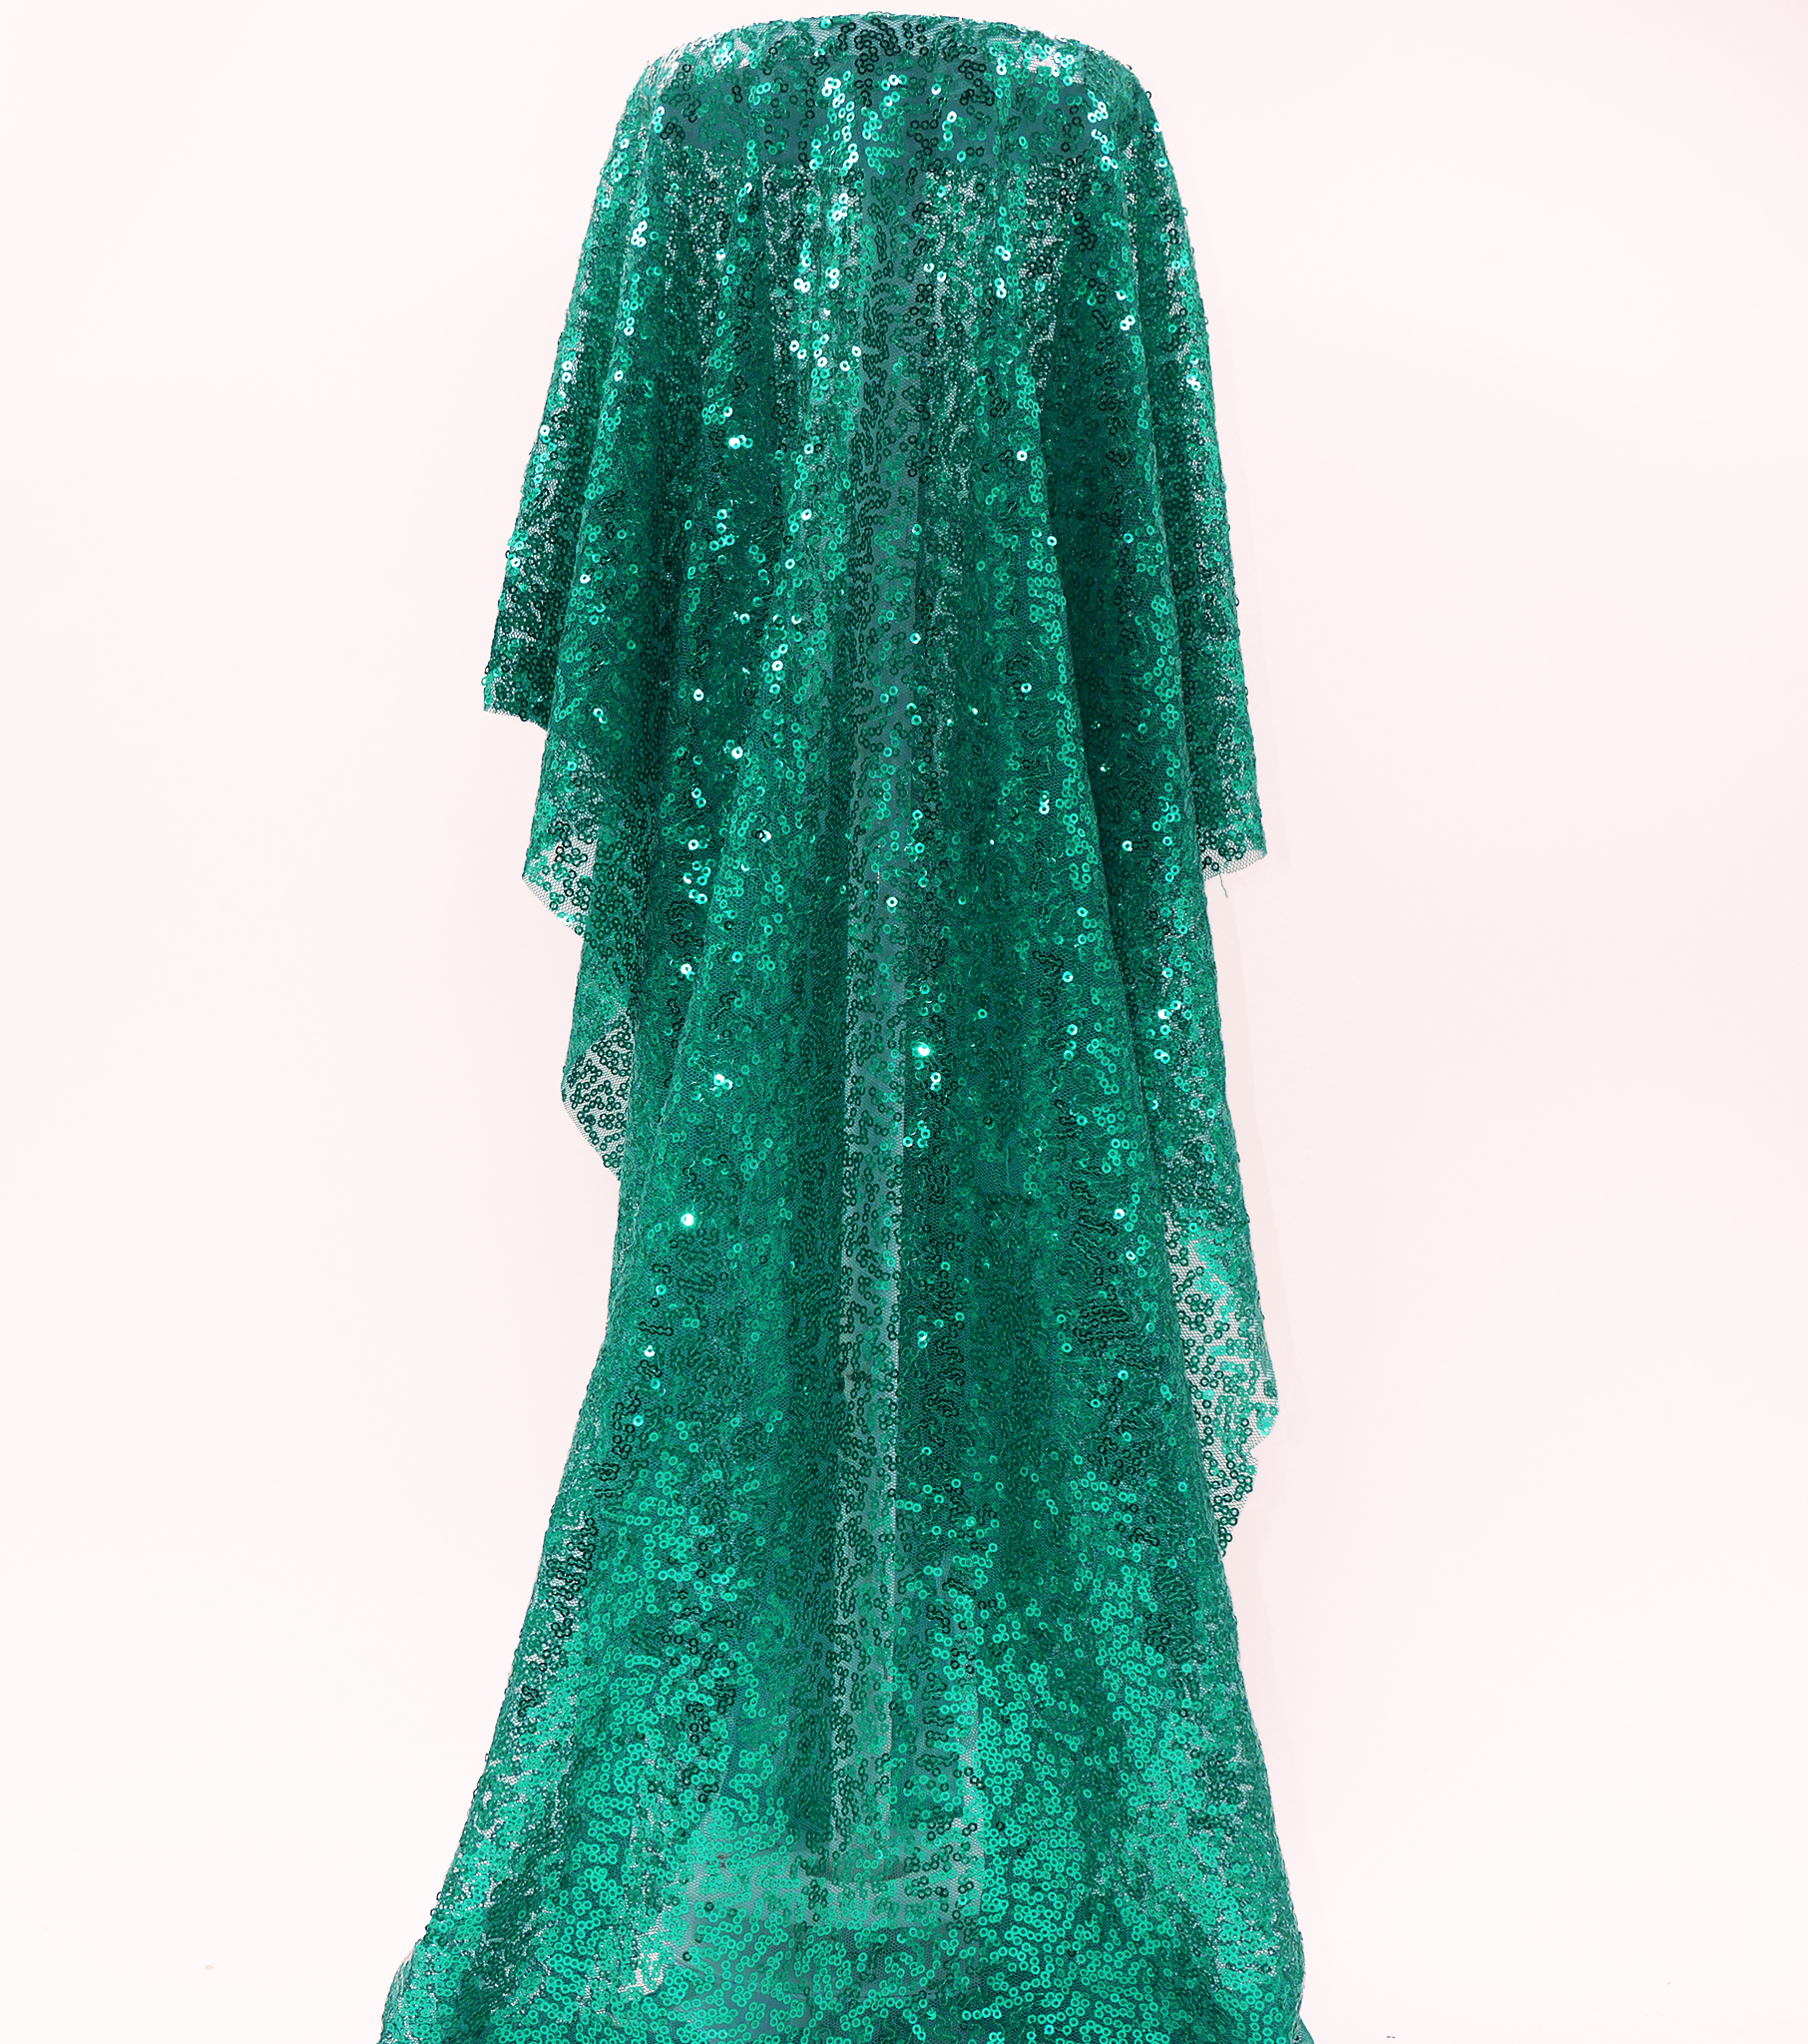 Polyester Mesh Sequins $25.00p/m - Jade